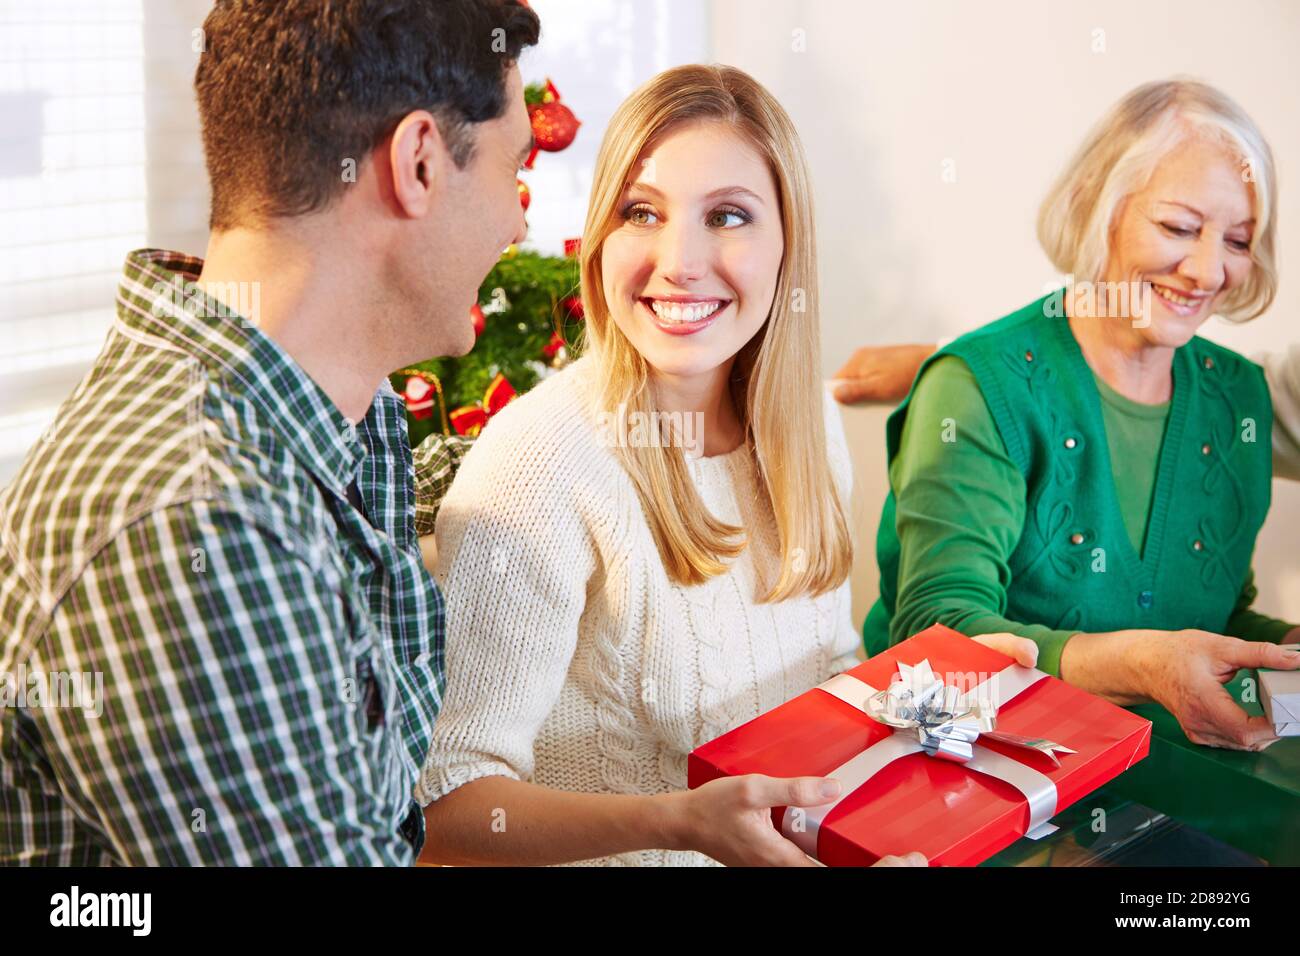 Man gives woman gift at Christmas with family Stock Photo